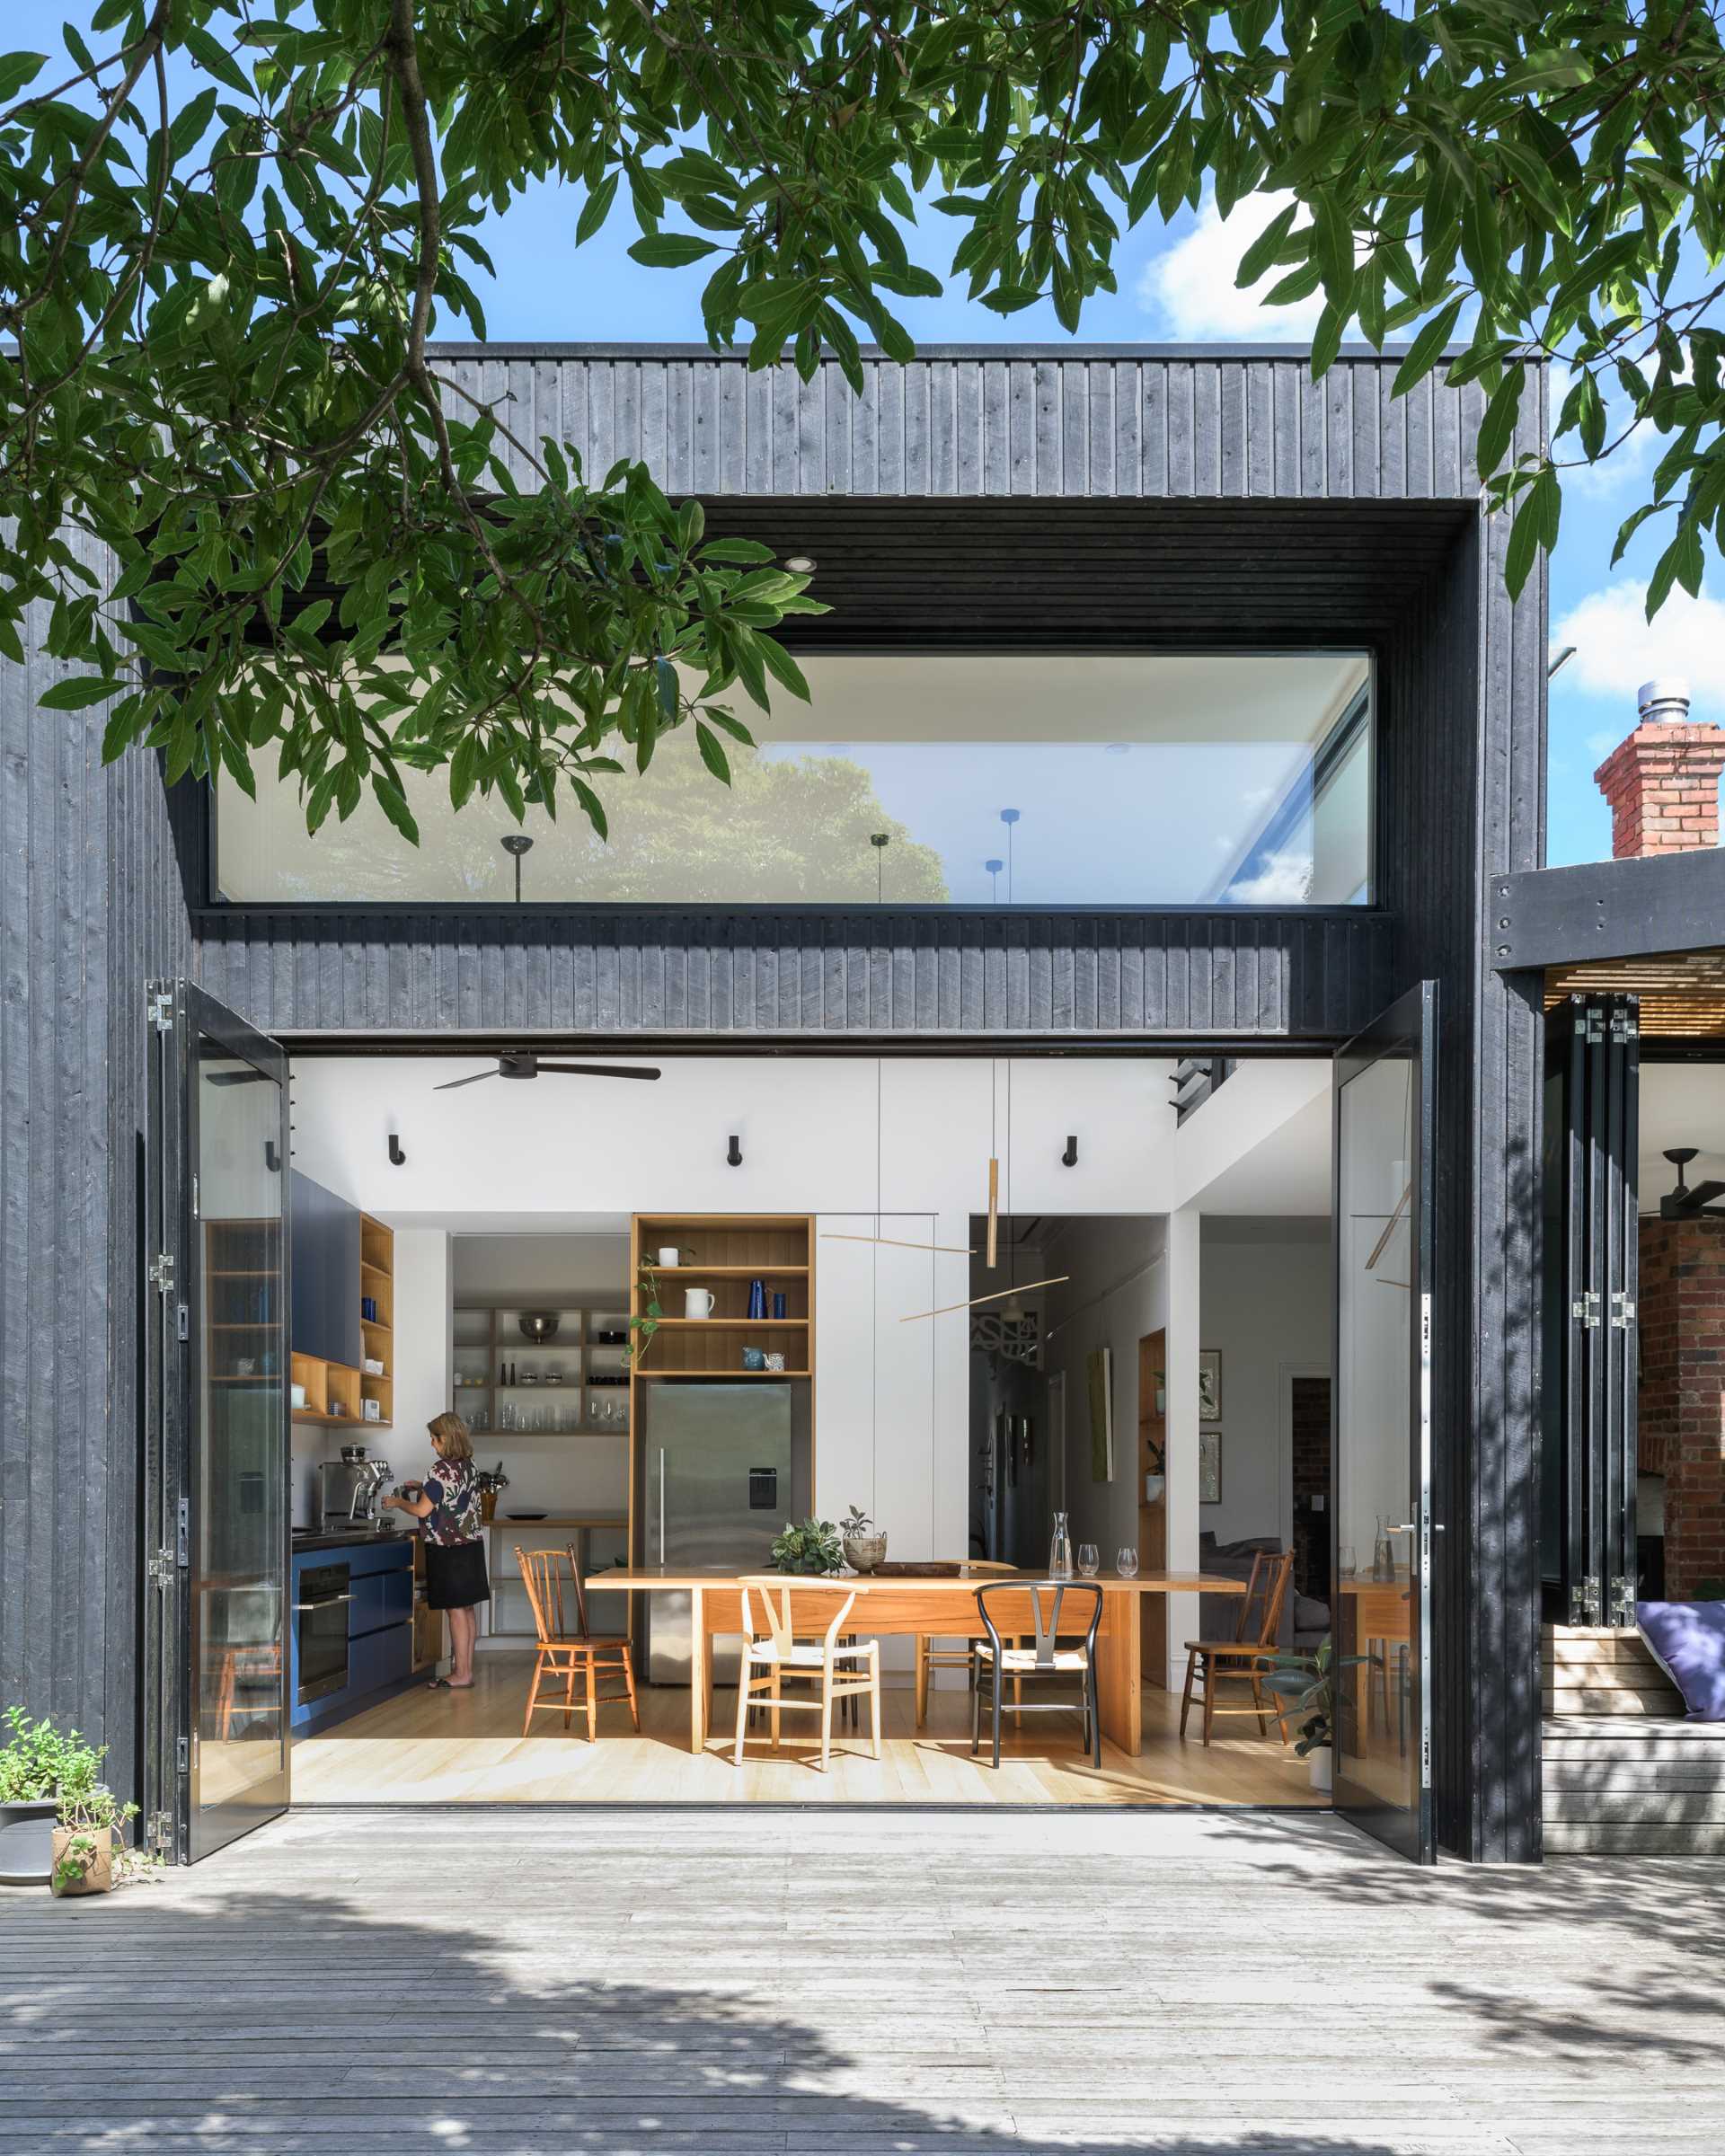 This modern rear extension has has bi-fold doors that open to connect the kitchen and dining area to the yard.